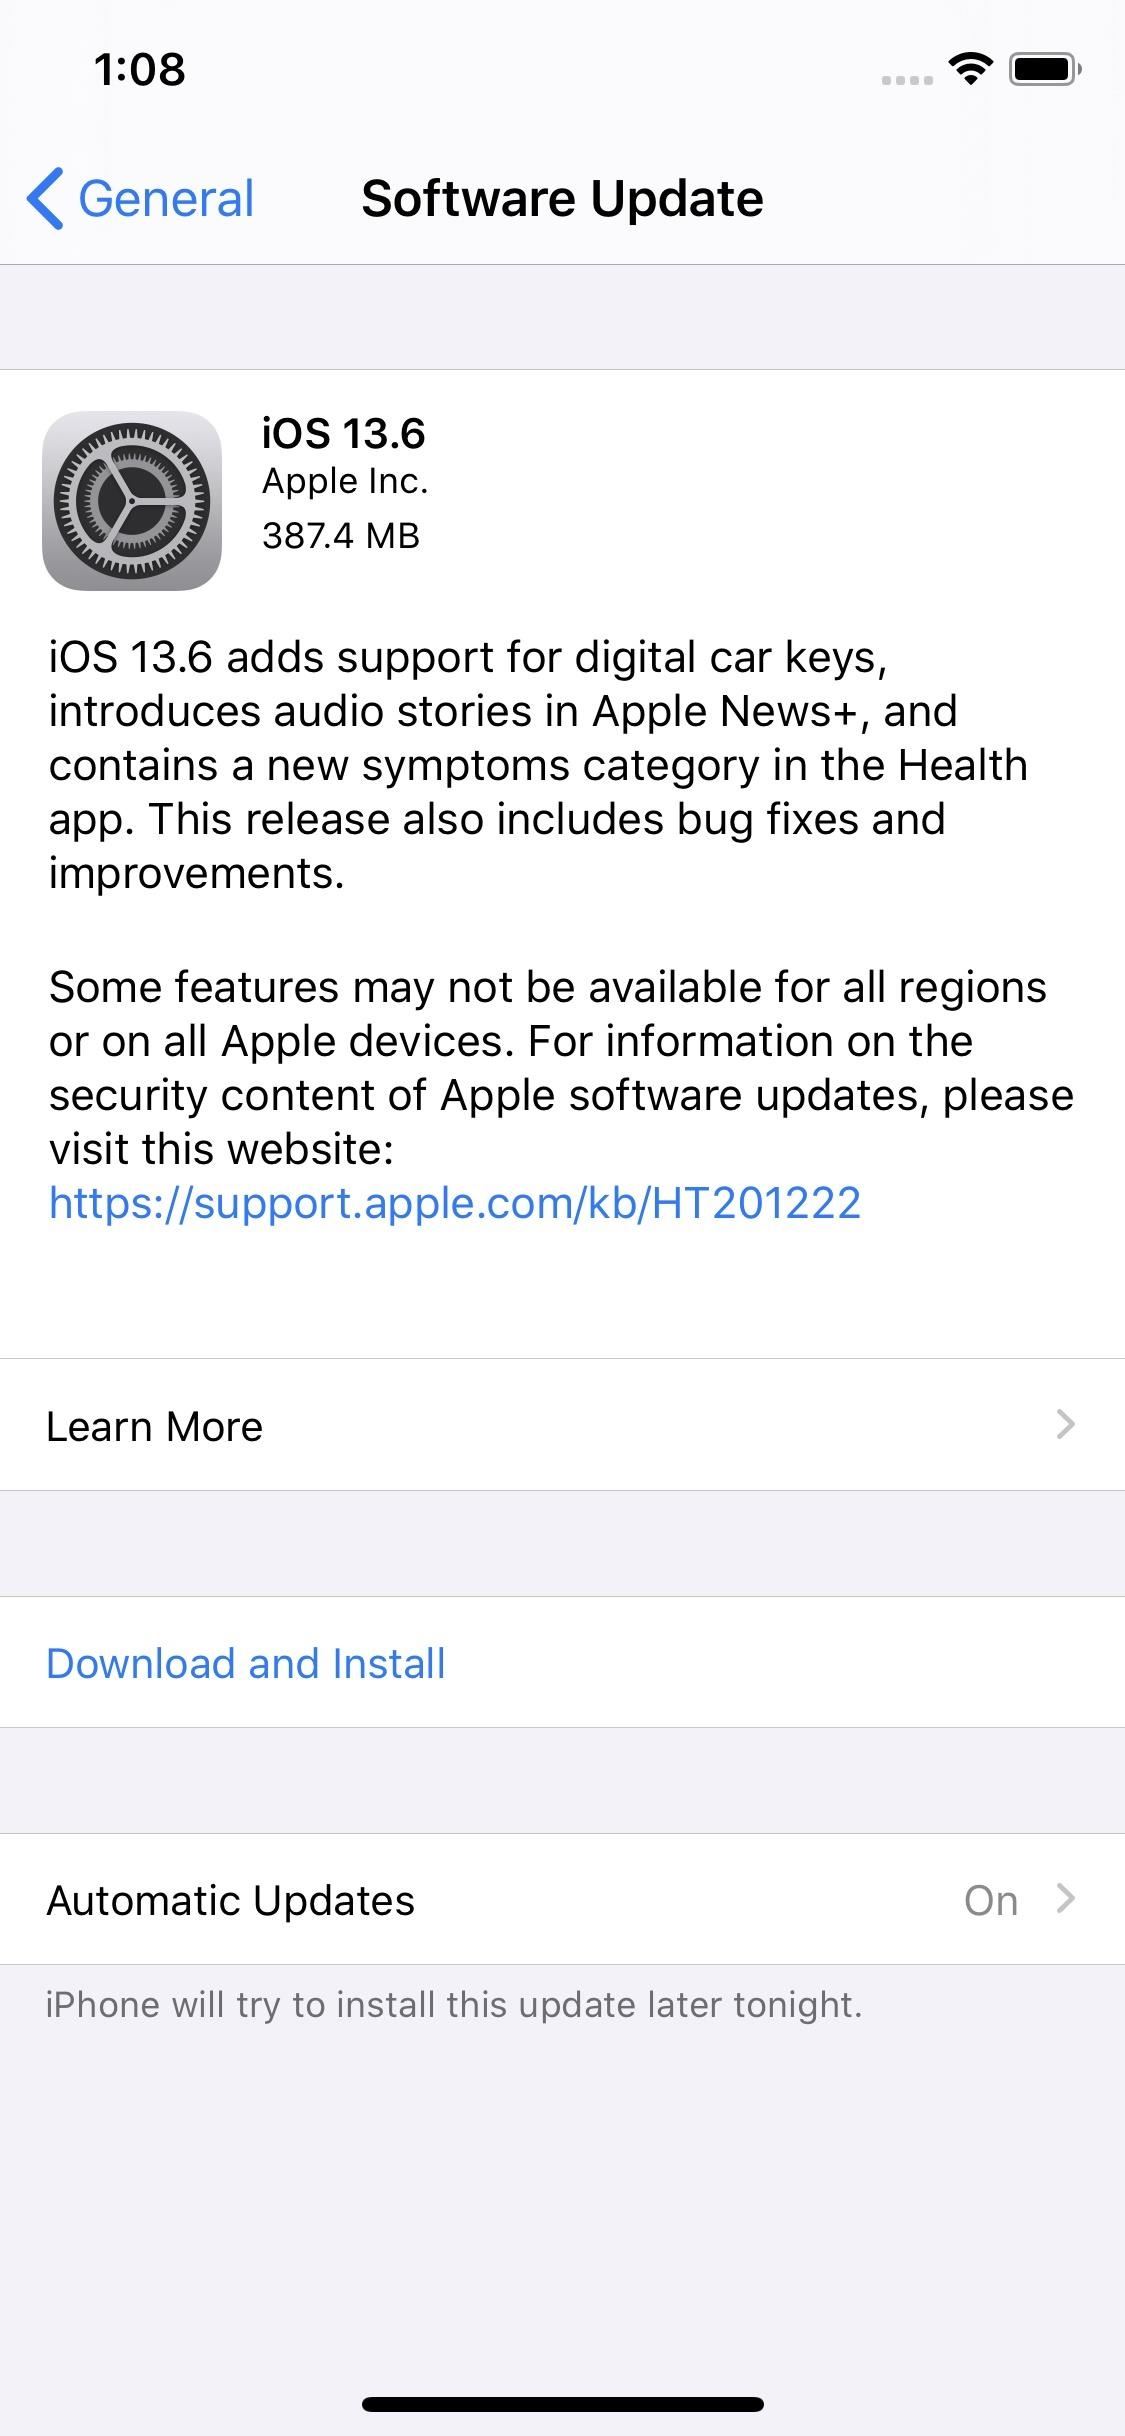 Apple Releases iOS 13.6 for iPhone, Includes Symptom Tracker, CarKey Support & Apple News Audio